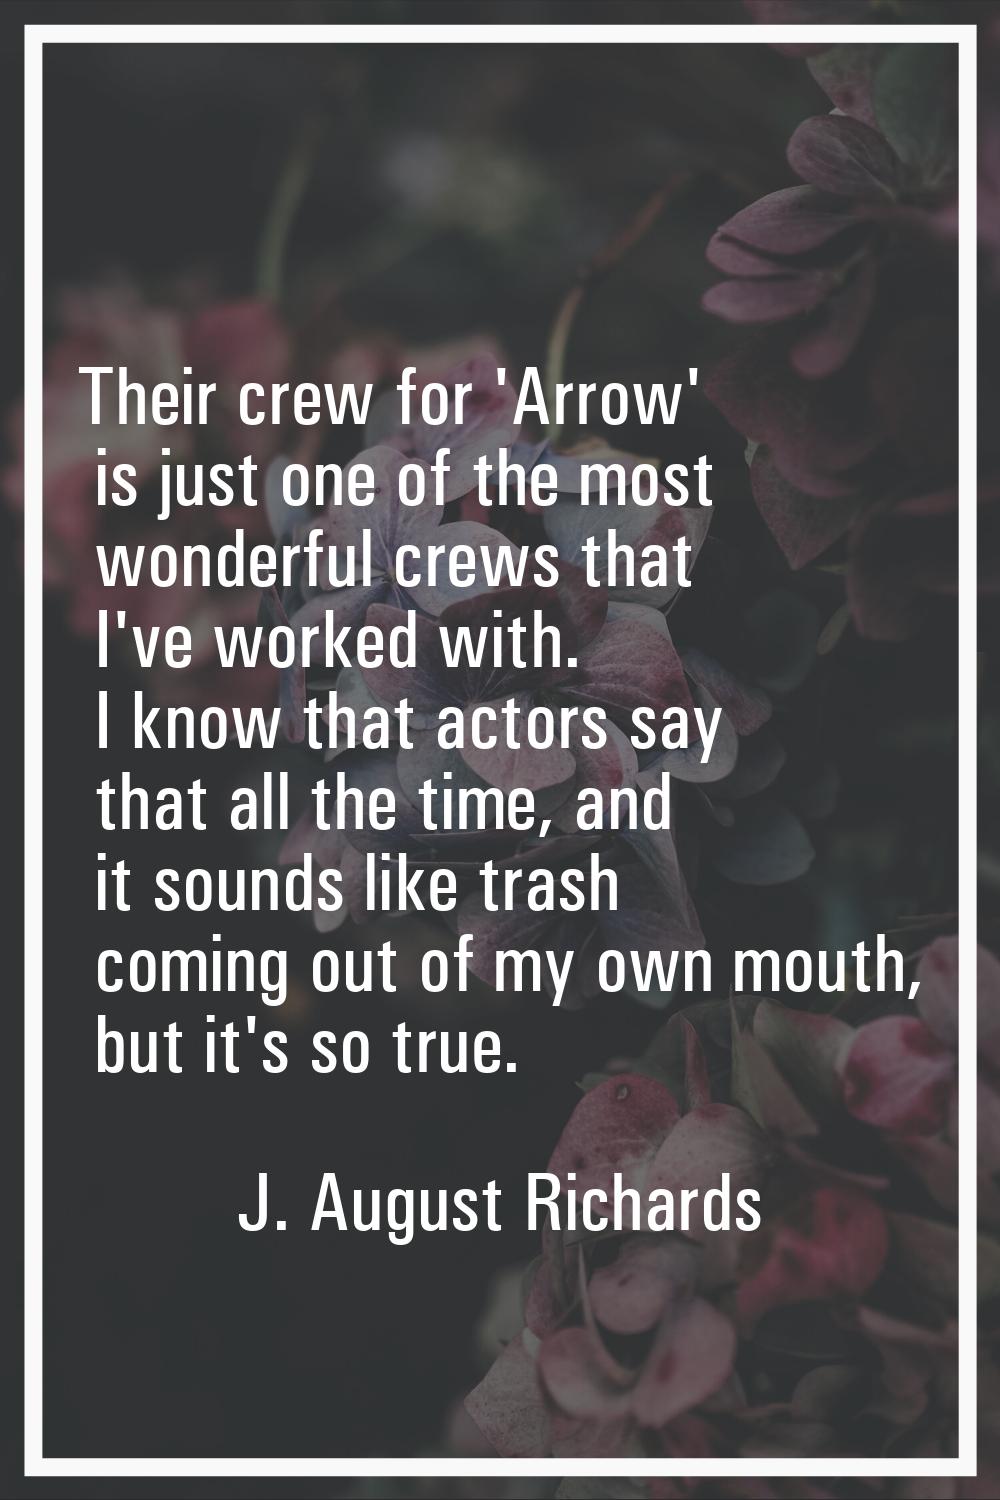 Their crew for 'Arrow' is just one of the most wonderful crews that I've worked with. I know that a